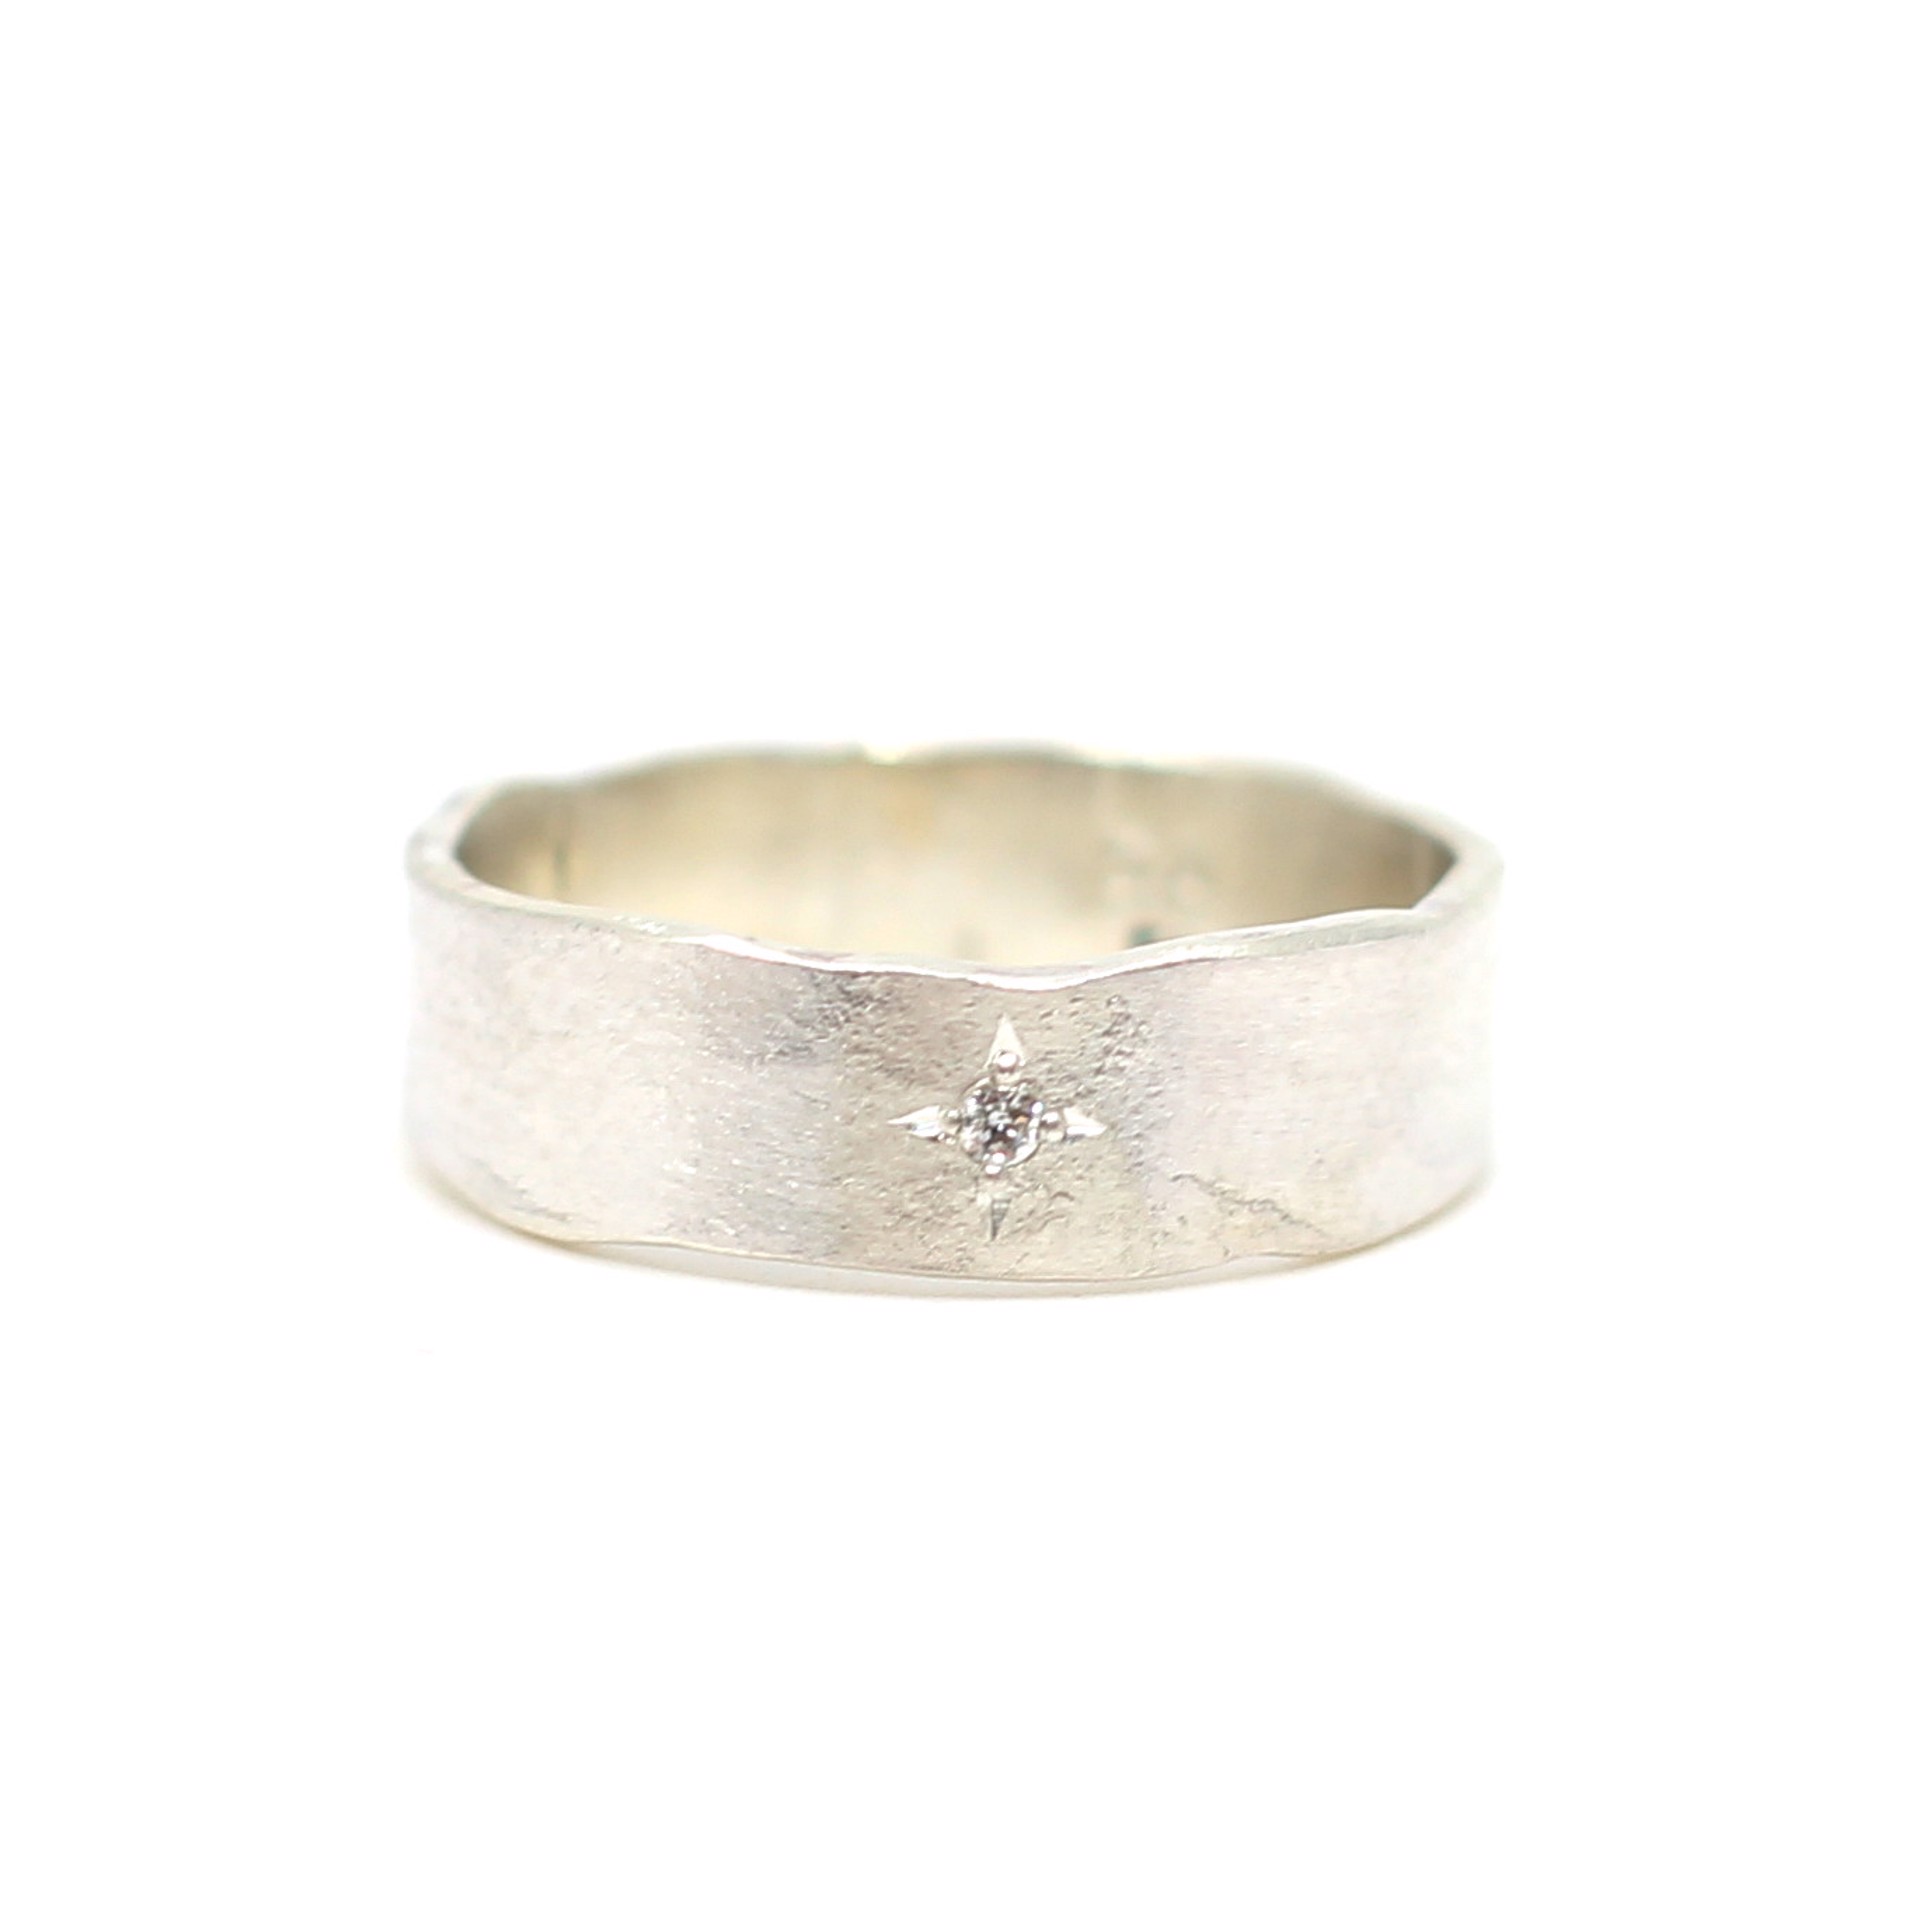 Single Star Ring (Size 10) by Leia Zumbro